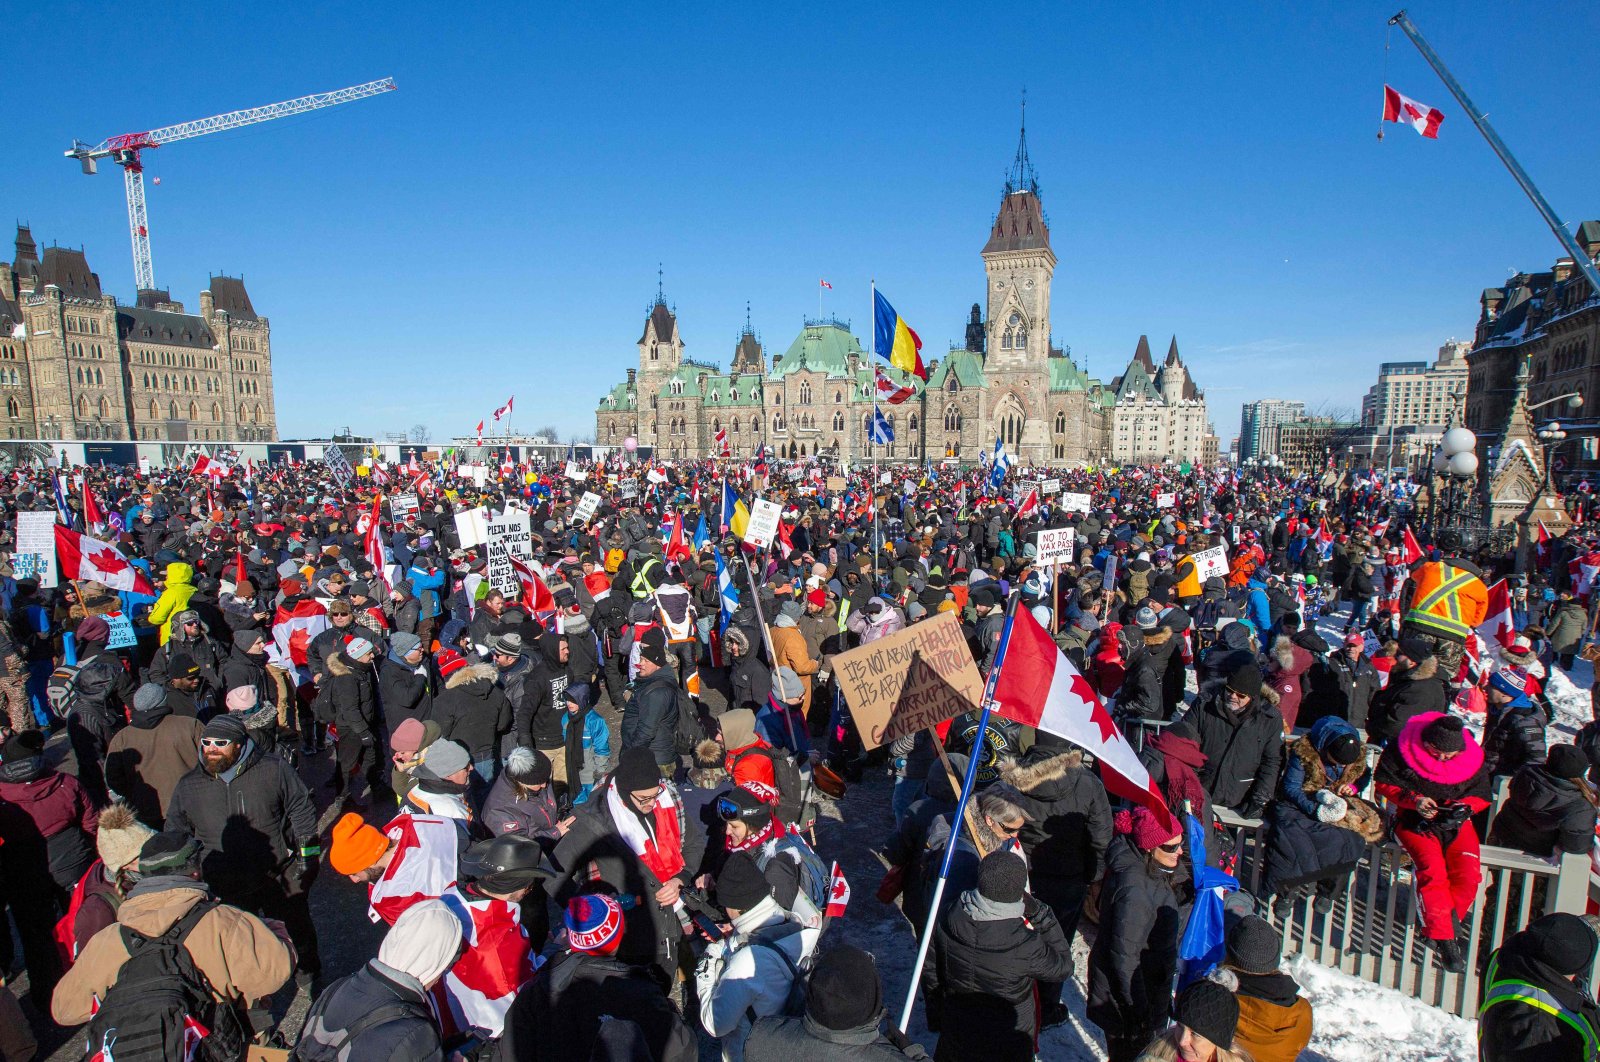 Supporters arrive at Parliament Hill for the Freedom Truck Convoy to protest against COVID-19 vaccine mandates and restrictions in Ottawa, Canada, Jan. 29, 2022. (AFP Photo)